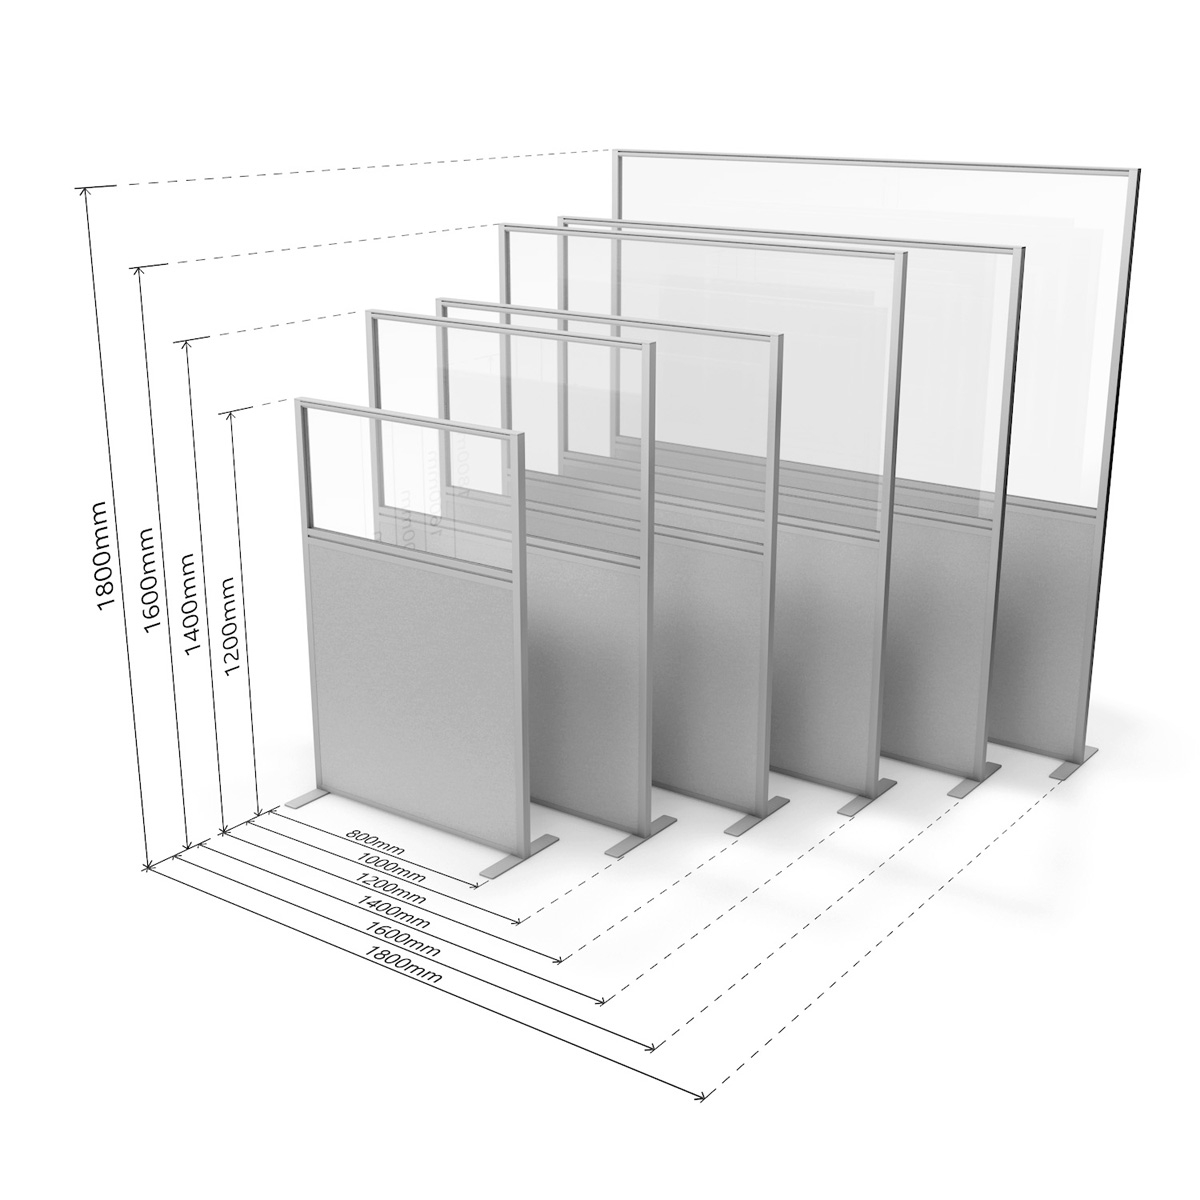 Dimensions of FRONTIER® Free Standing Part Glazed Office Partition Screens